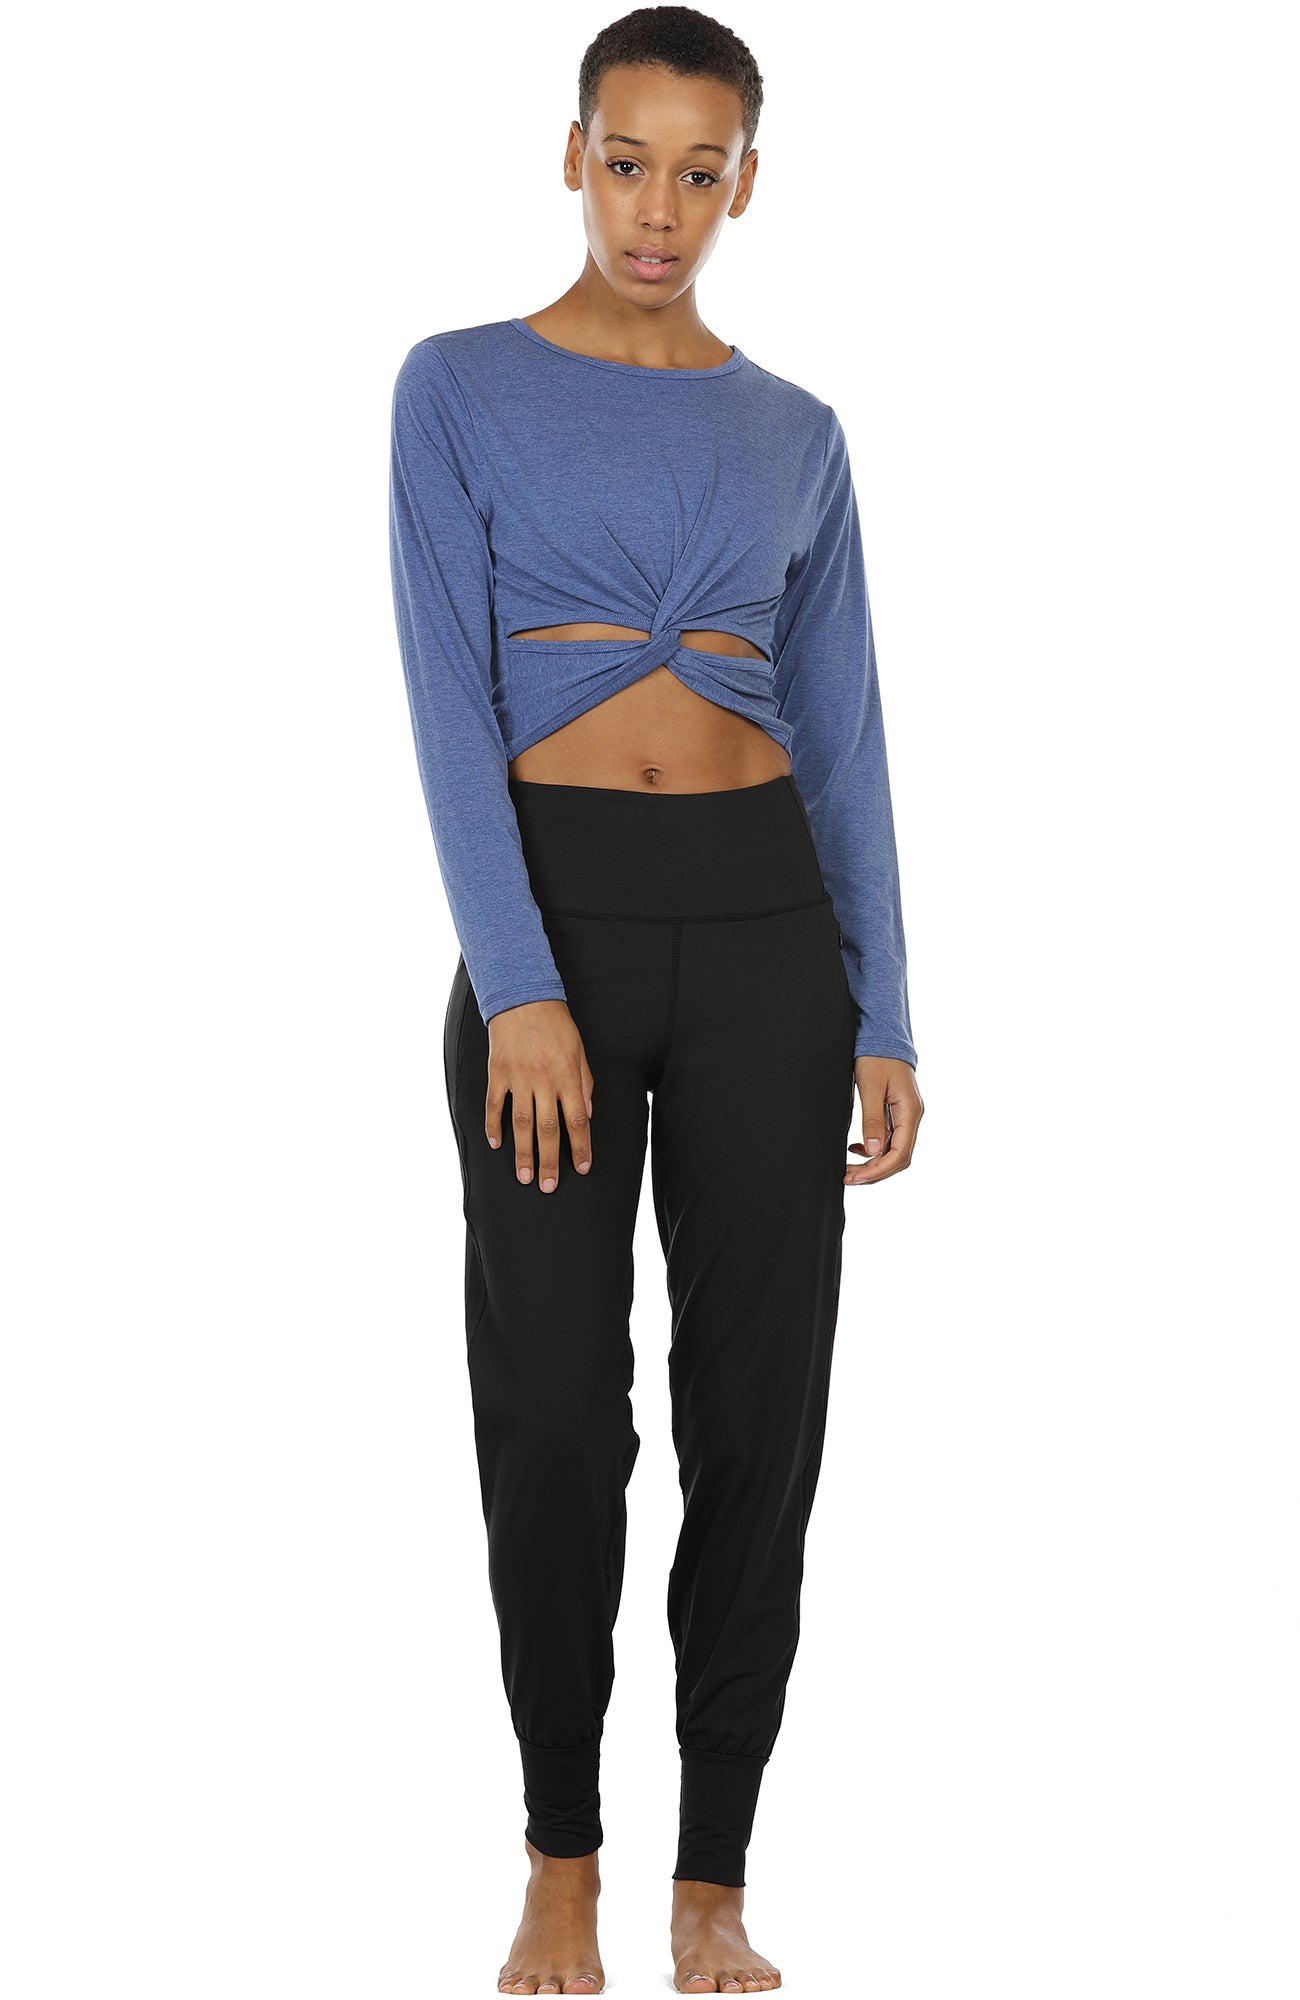 Free People Cropped Athletic Leggings for Women